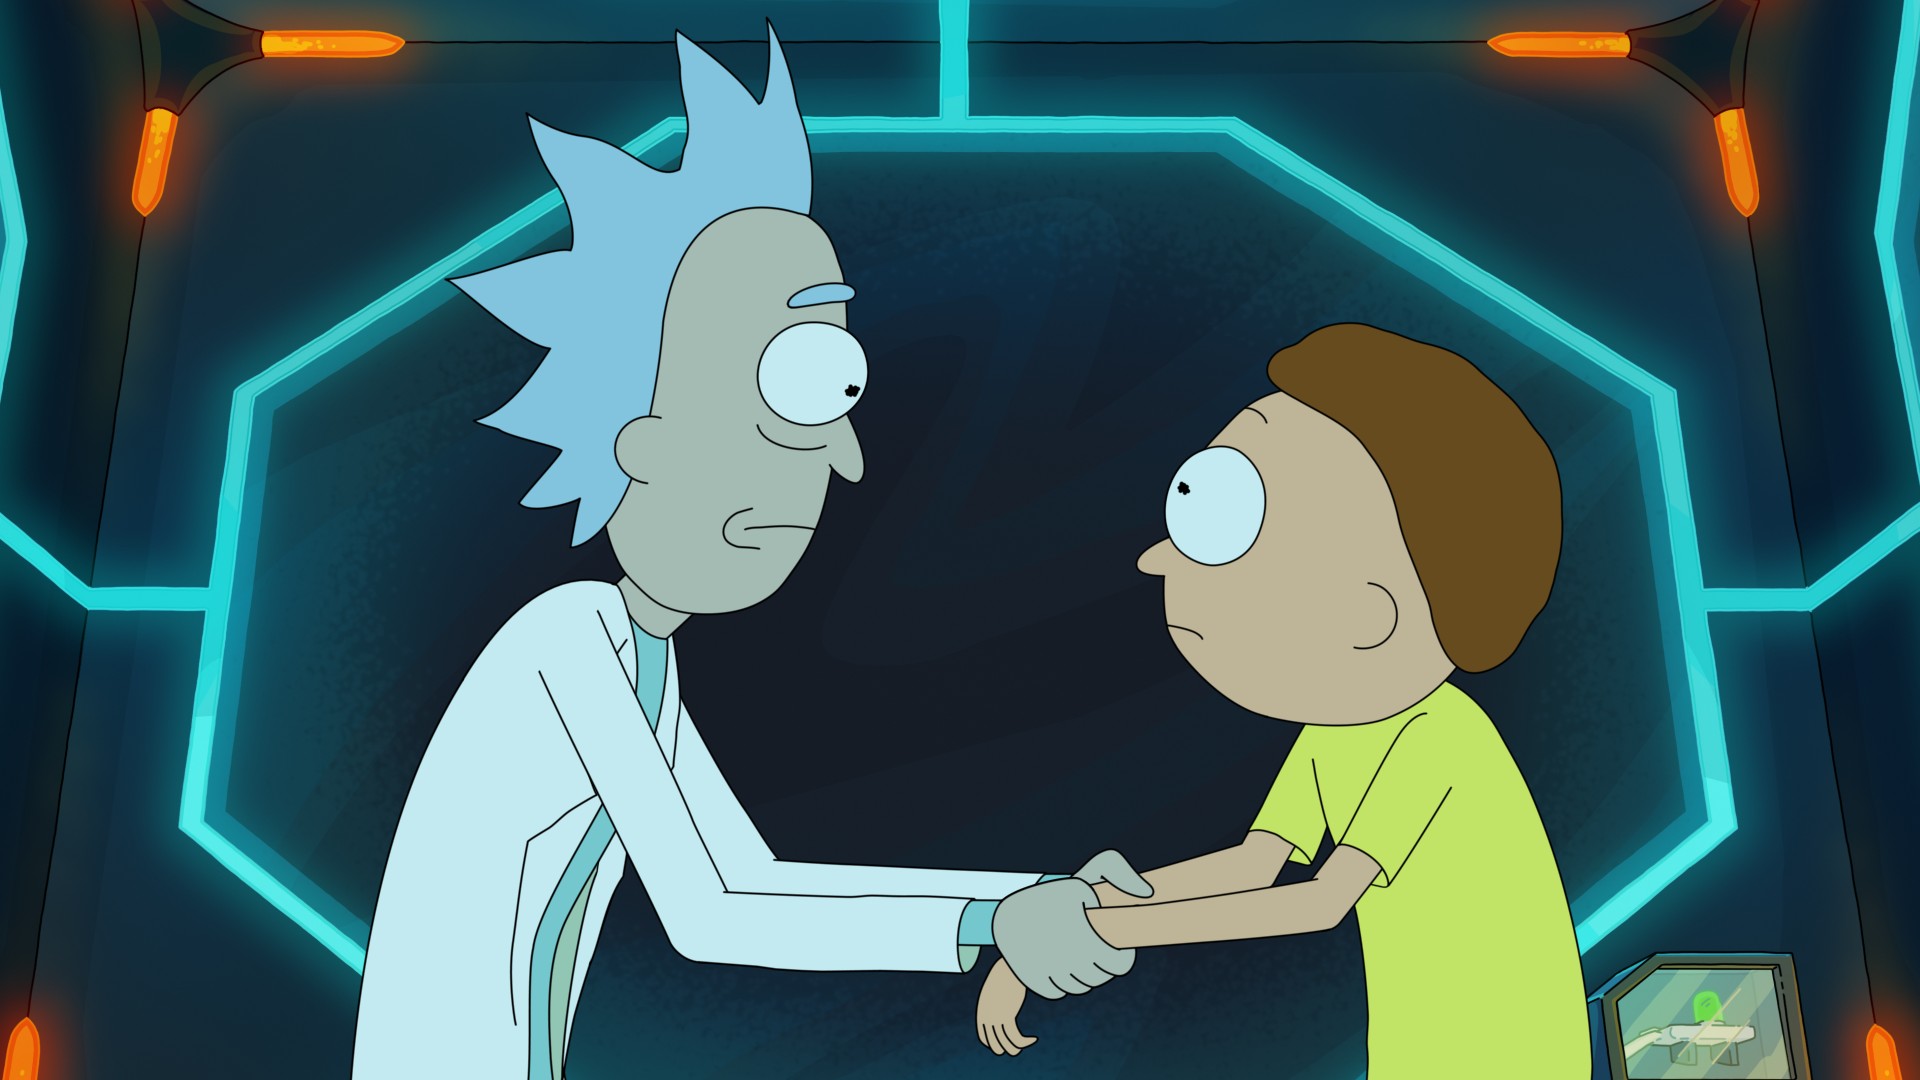 Breaking Morty or Ricky Bad or just Rick and Morty x Breaking Bad